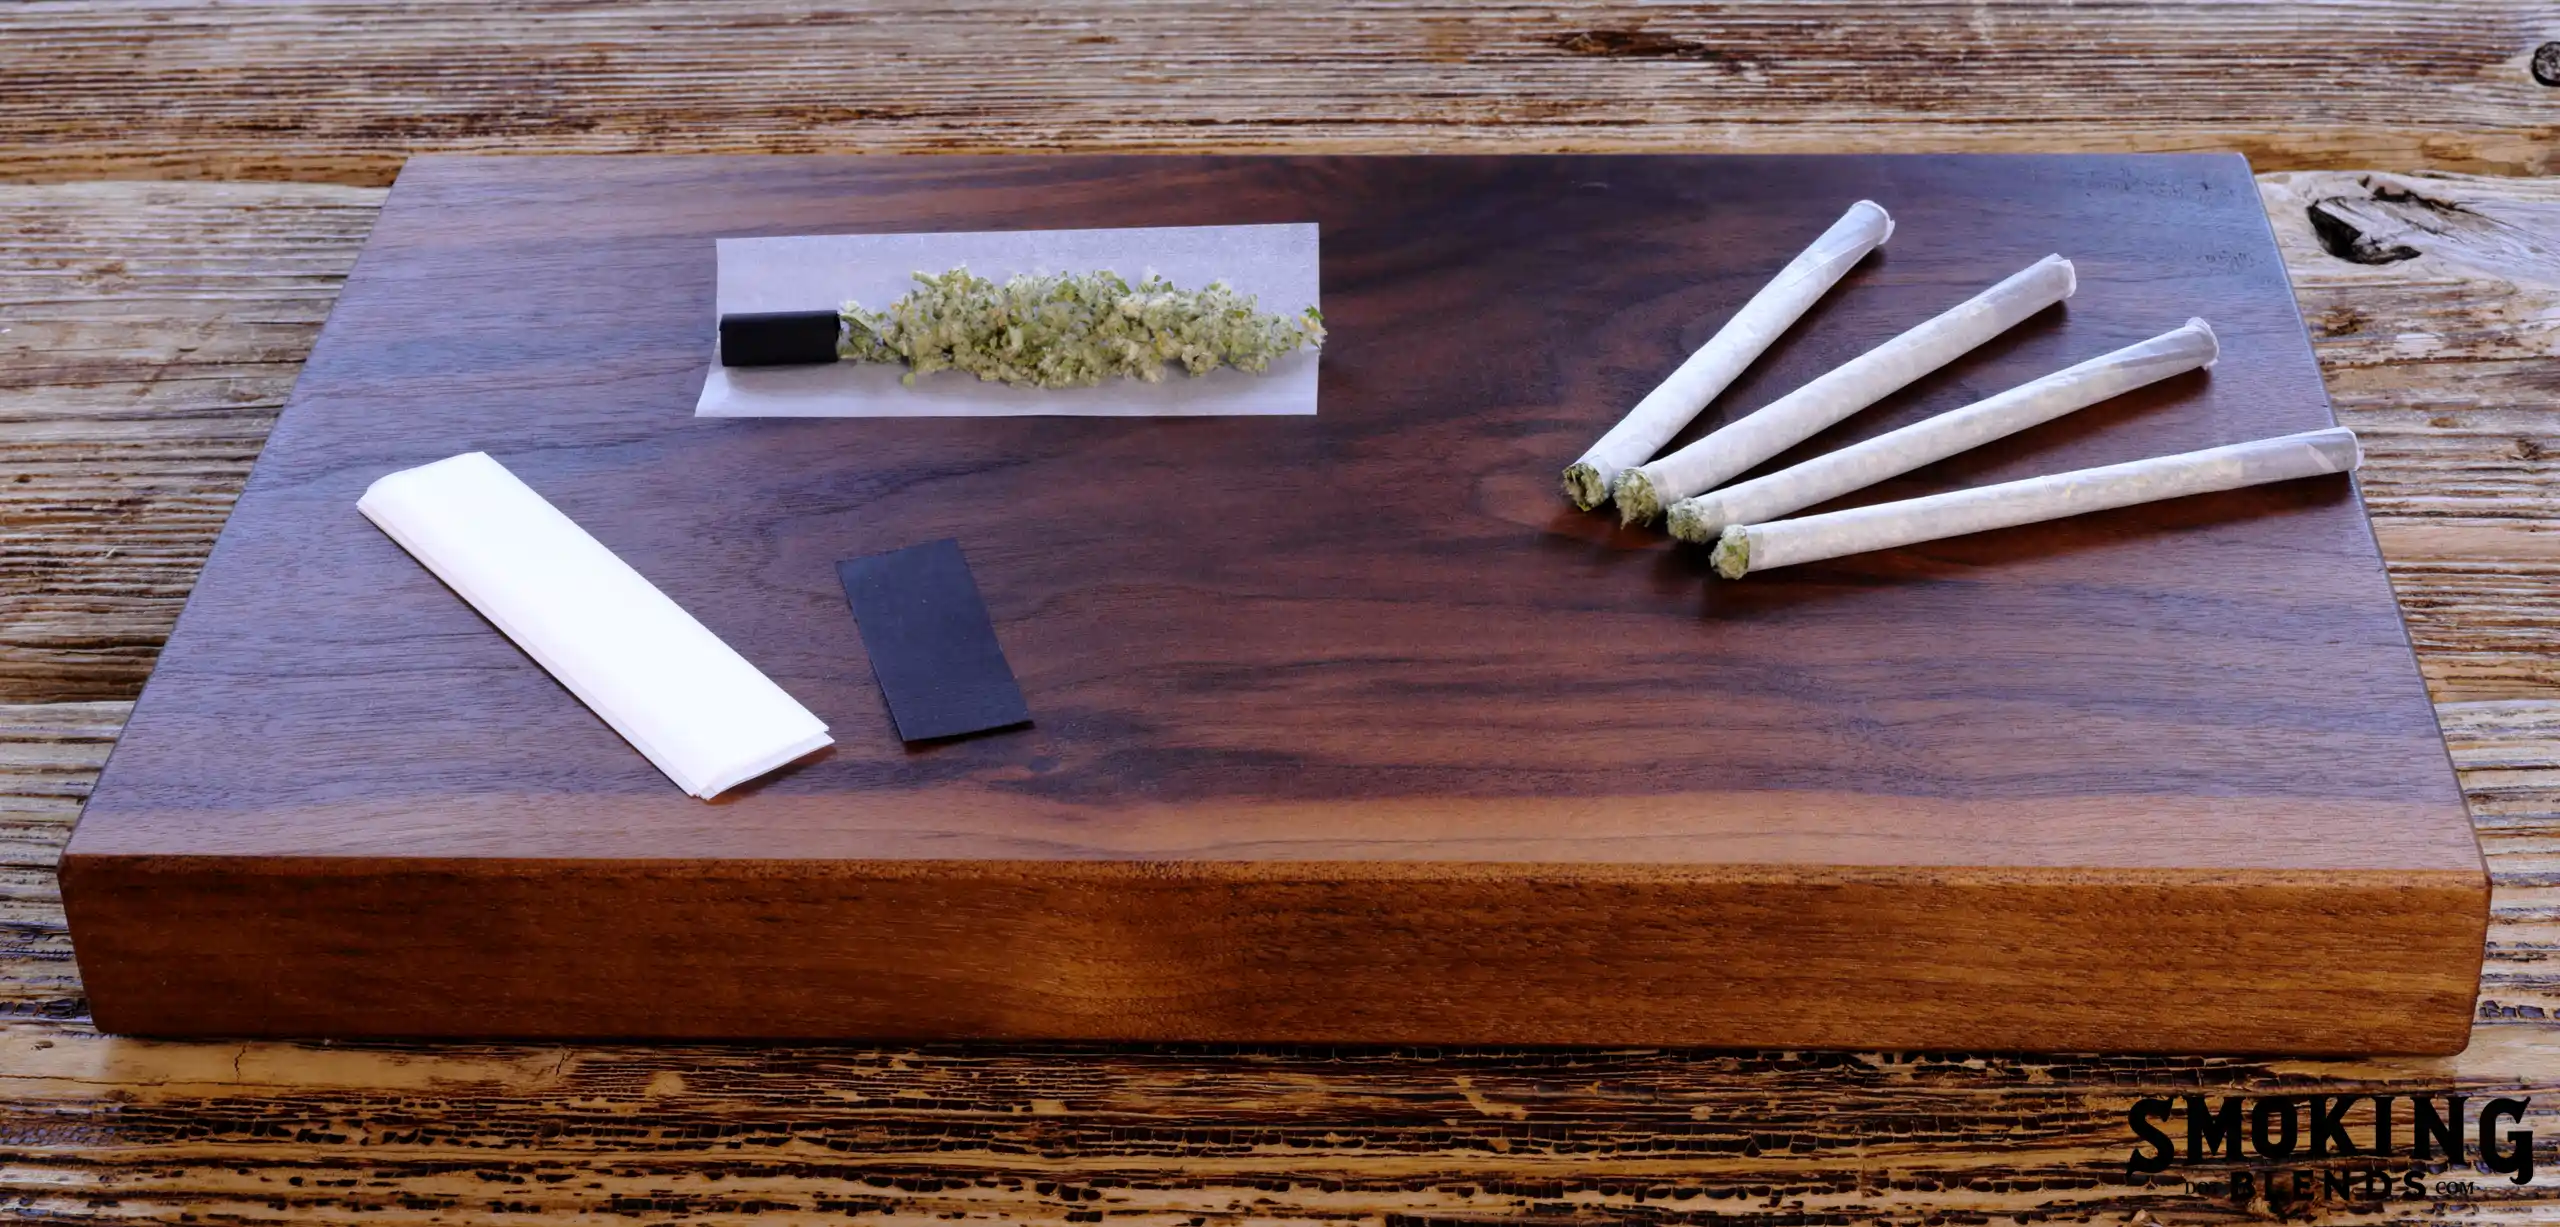 A Rolling Tray with Herbal Cigarettes and Smoking Herbs on It